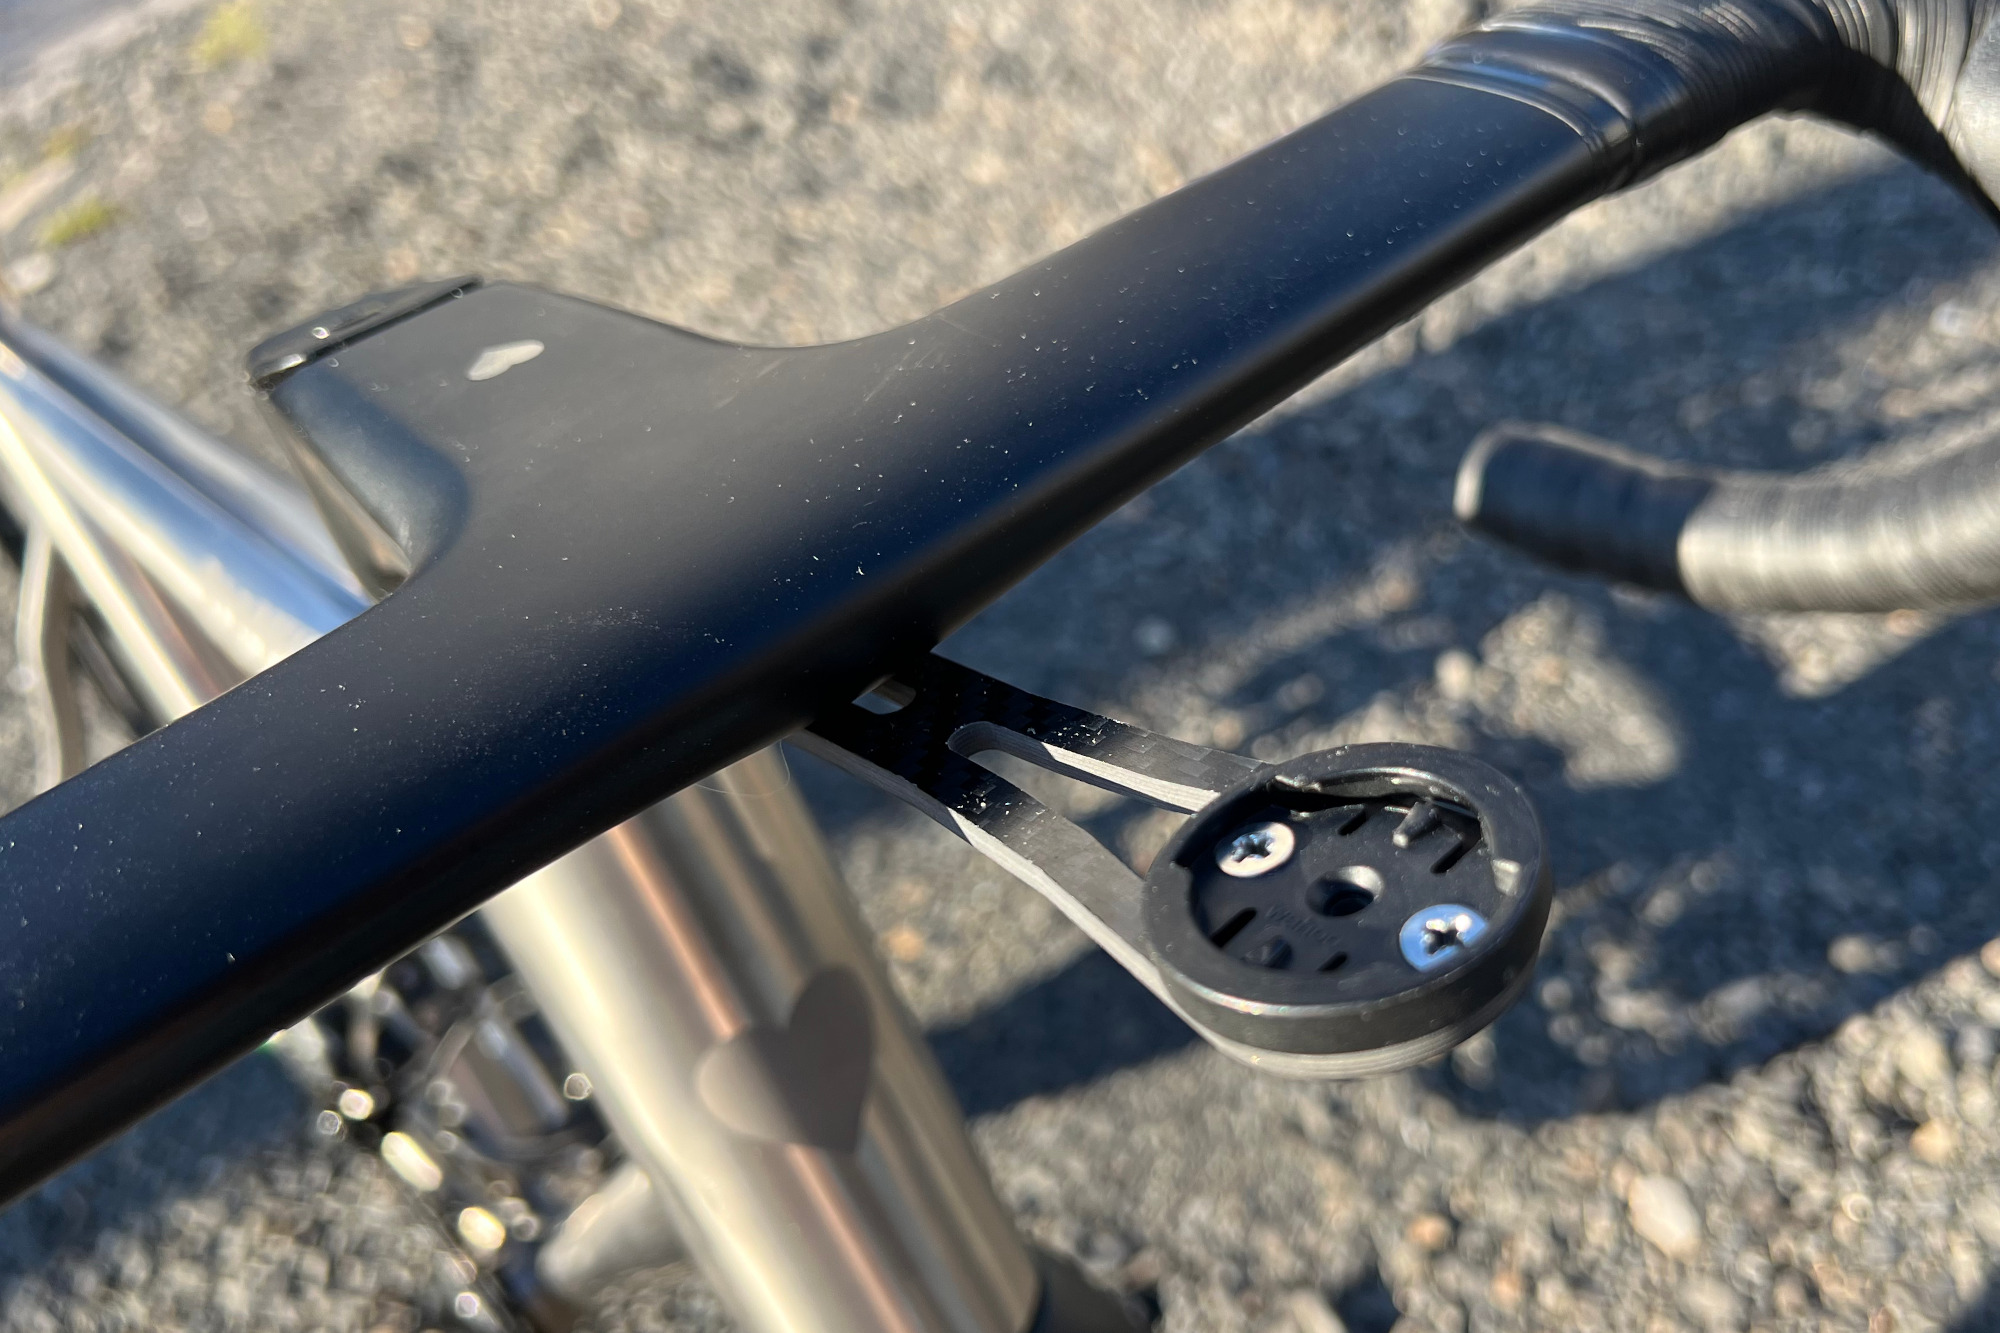 Blackheart Bike Co's Road Ti reviewed: Blackheart integrated cockpits come with a carbon fiber mount that can accommodate a Garmin or Wahoo bike computer.